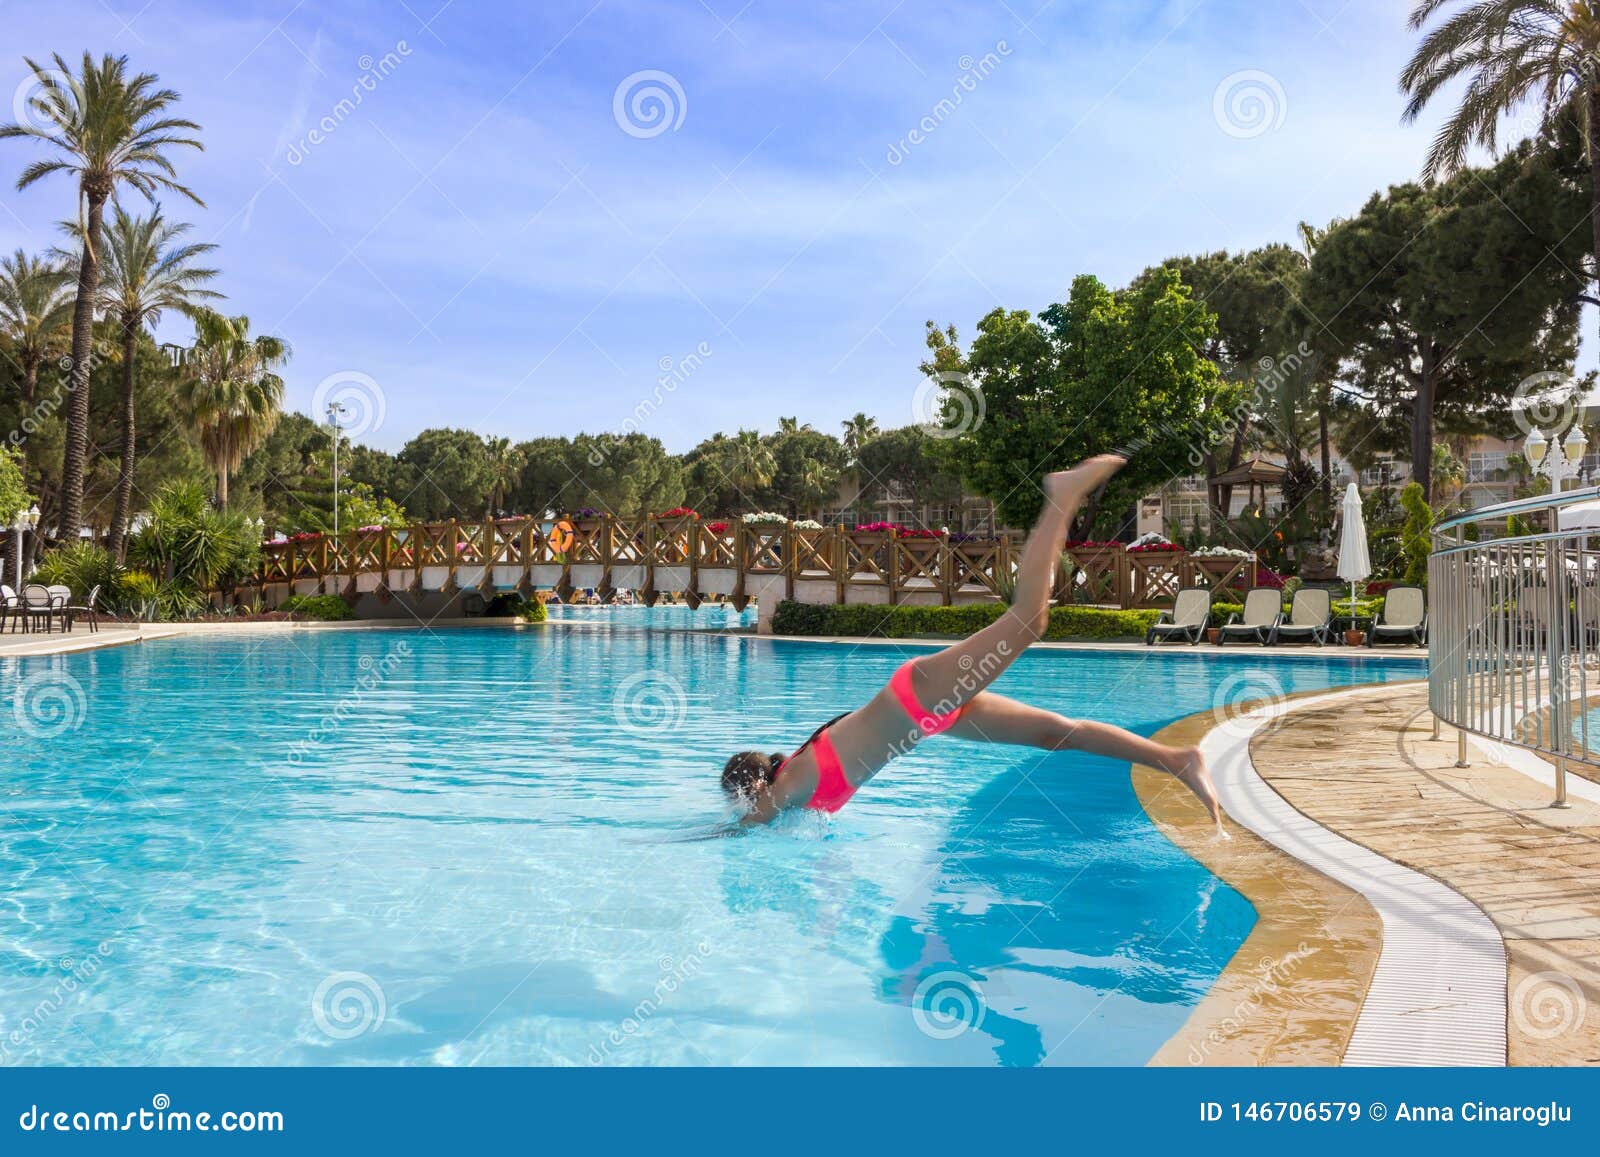 Young Teen Girl Swims And Have Fun In The Outdoor Pool